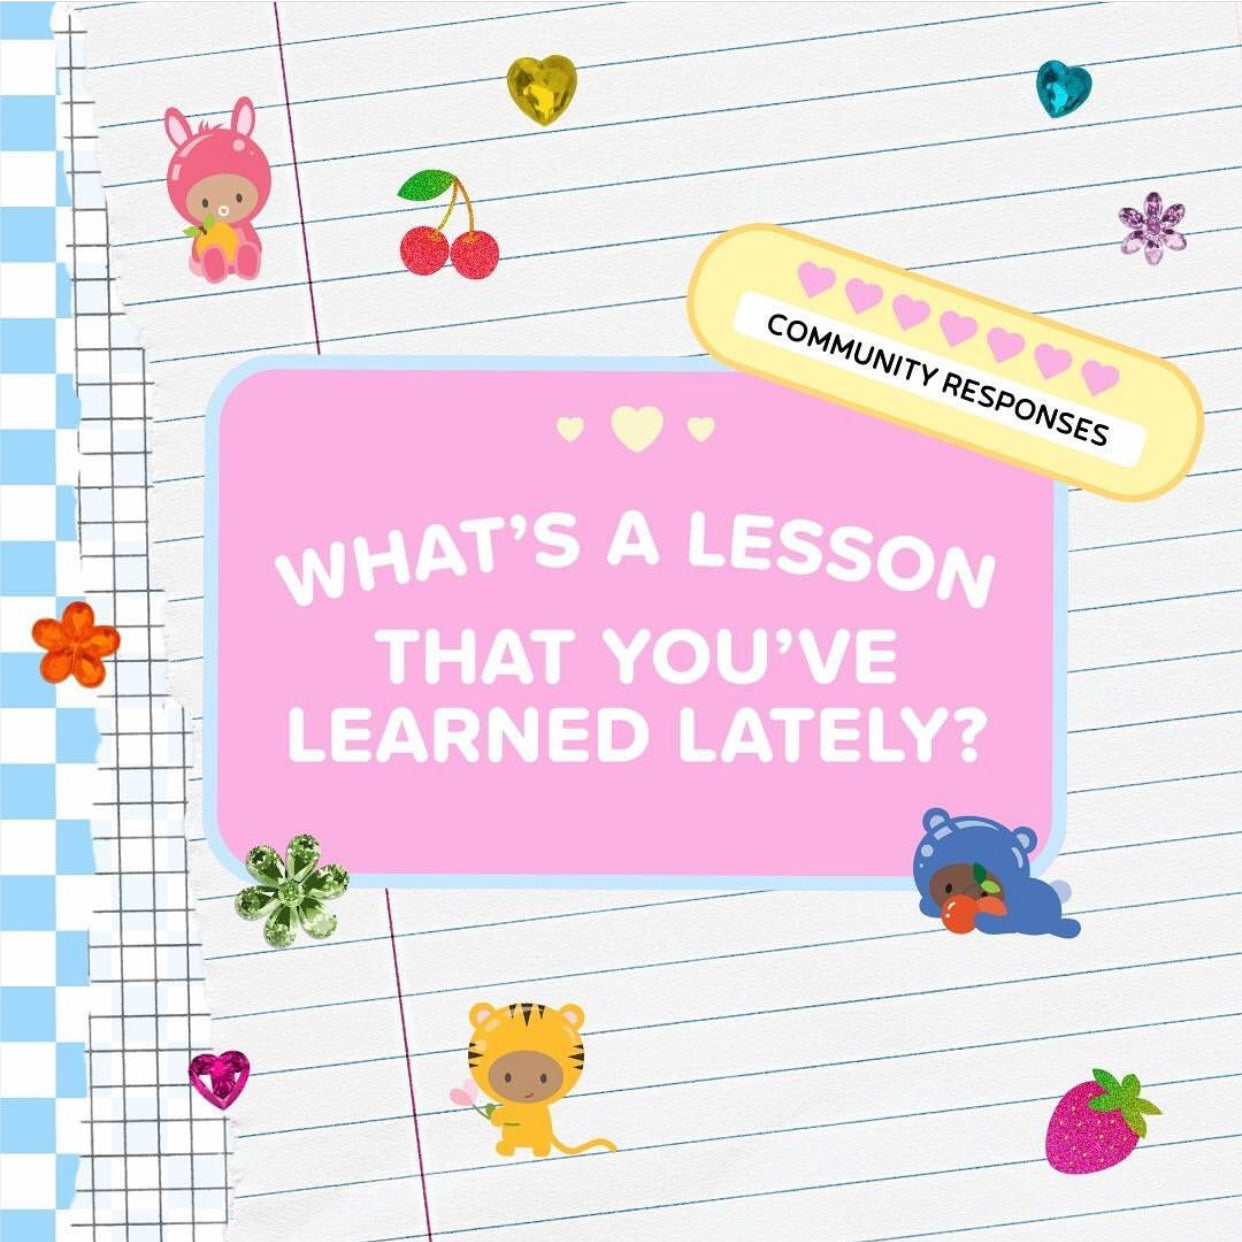 What's a lesson that you've learned lately?